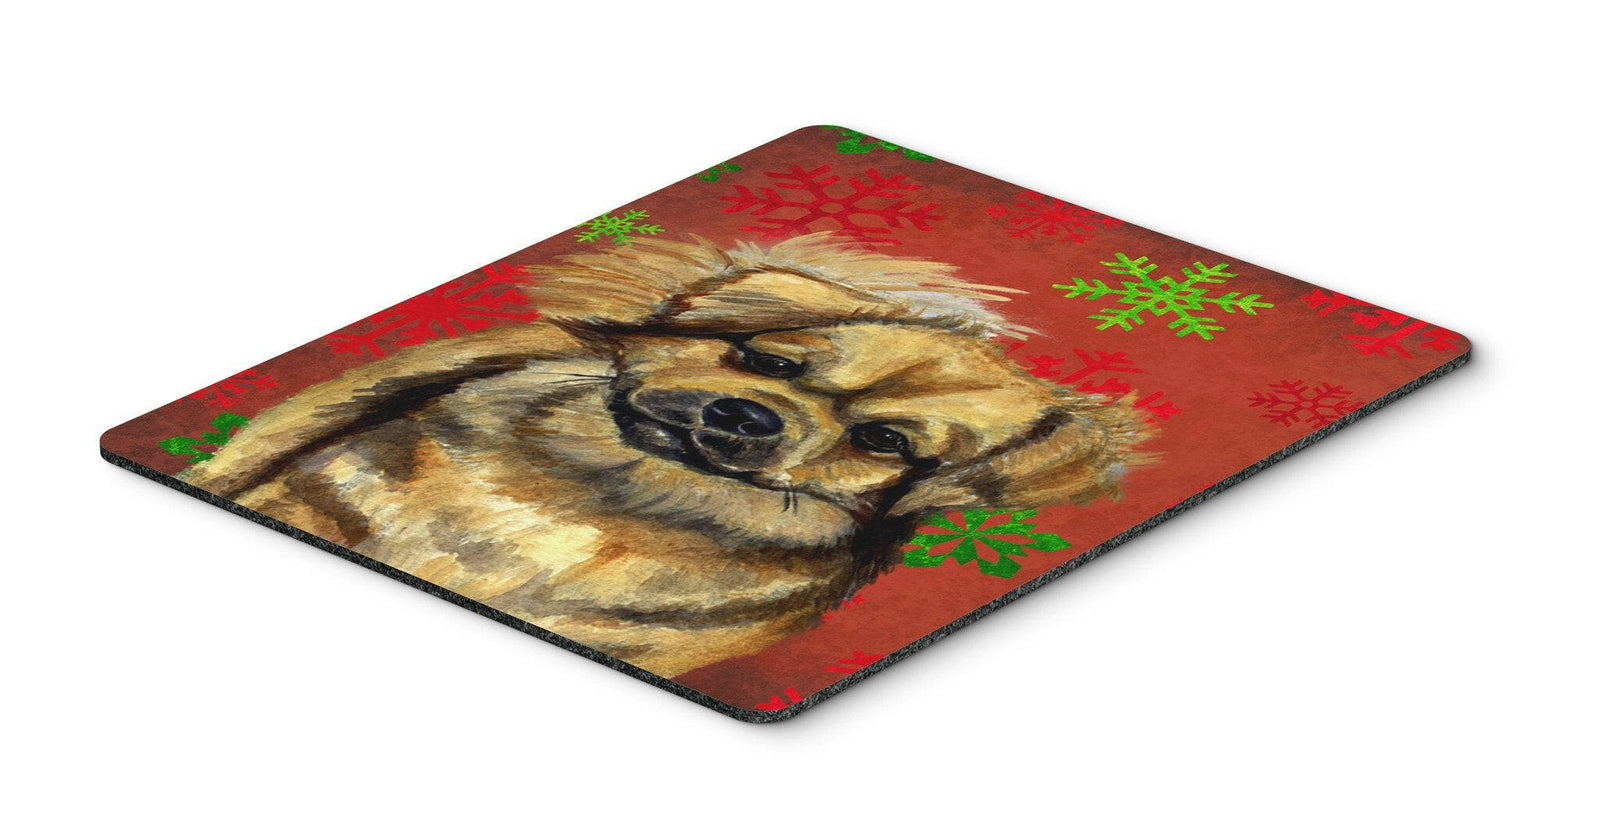 Tibetan Spaniel Red and Green Snowflakes Christmas Mouse Pad, Hot Pad or Trivet by Caroline's Treasures